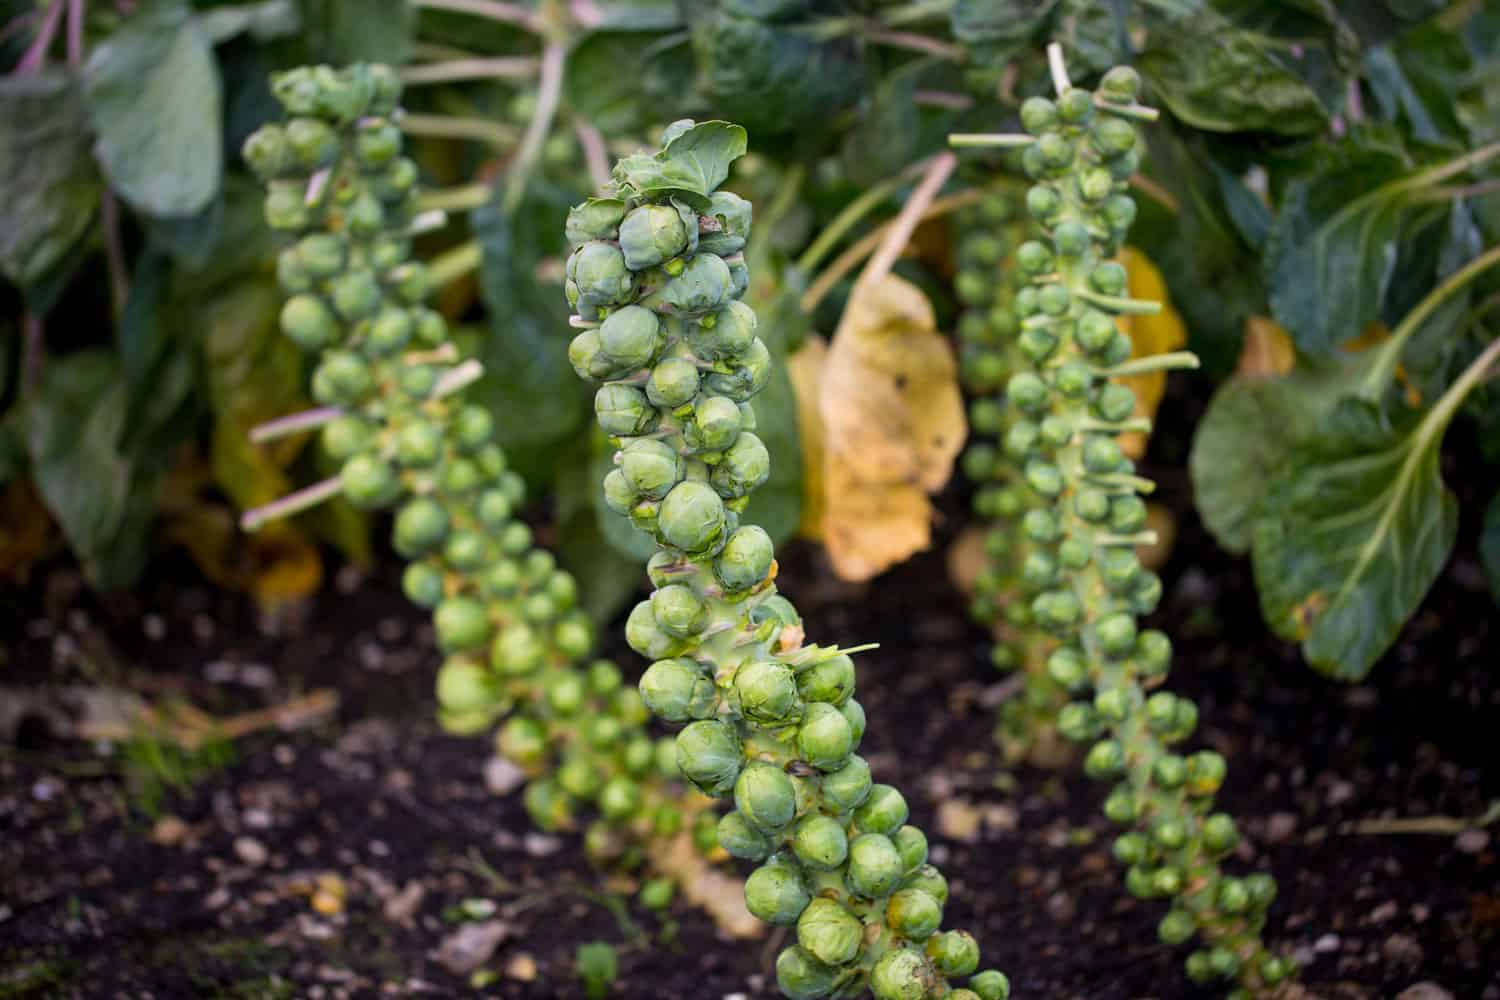 hanging Brussel sprouts grown in the garden